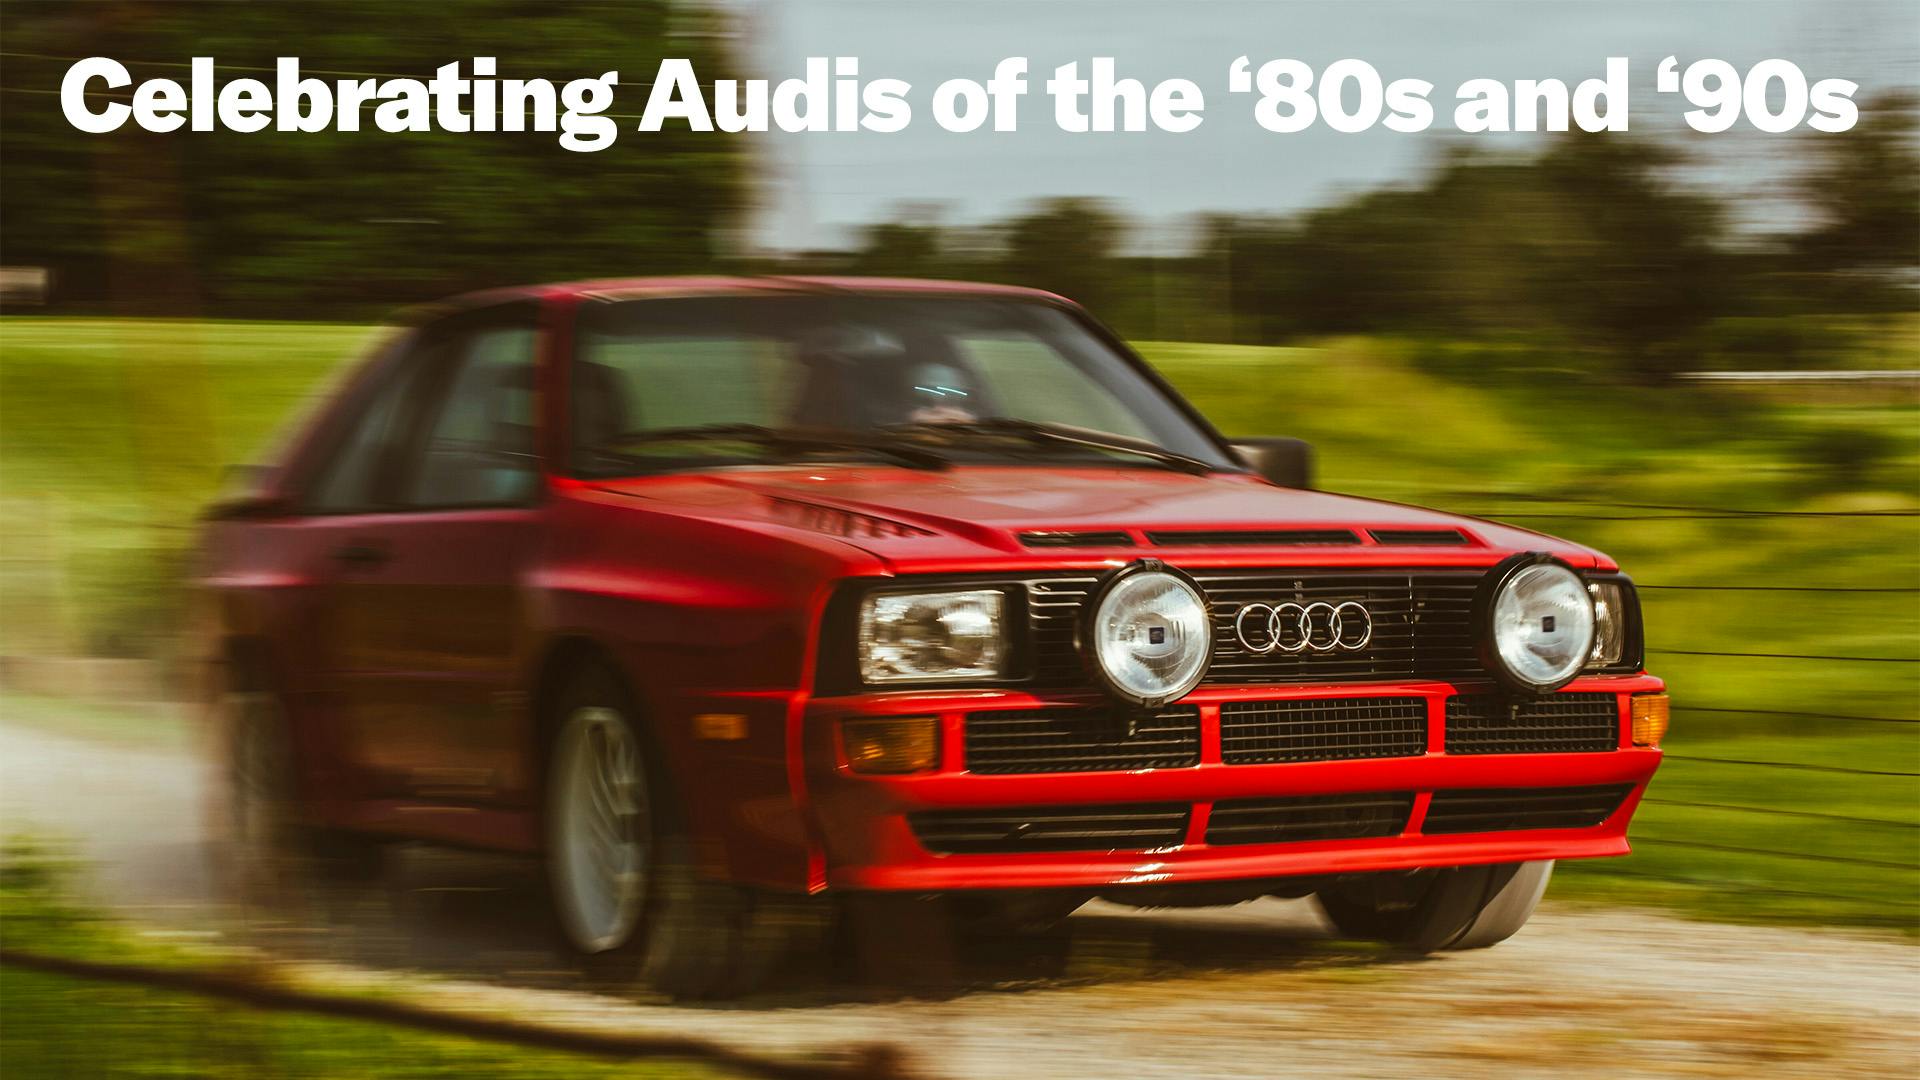 Celebrating Audis of the ‘80s and ‘90s